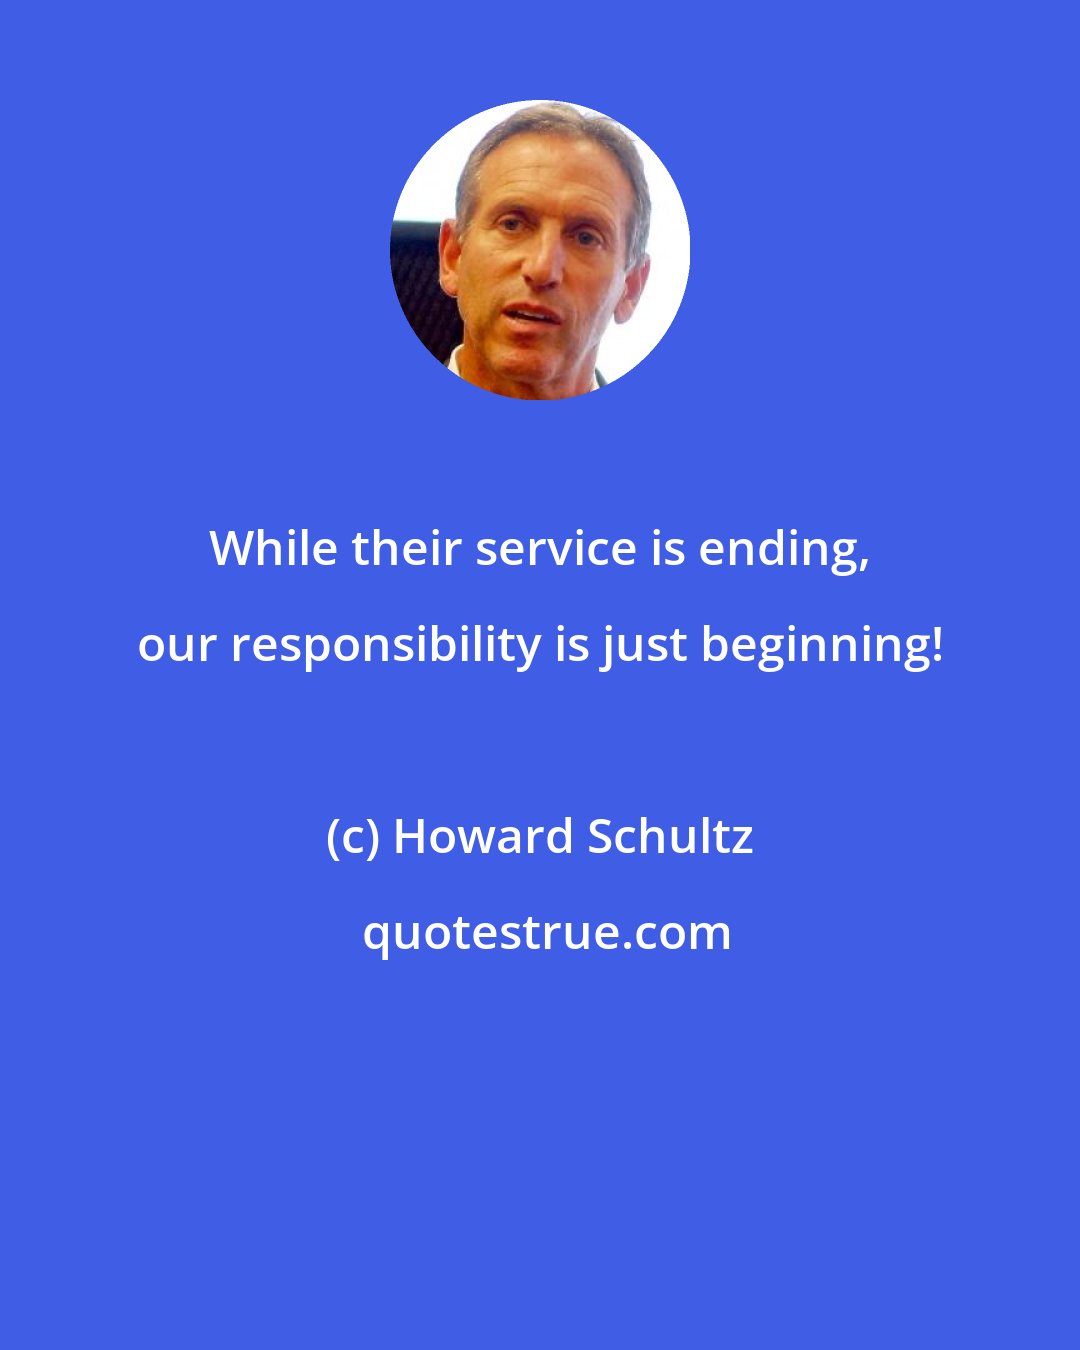 Howard Schultz: While their service is ending, our responsibility is just beginning!